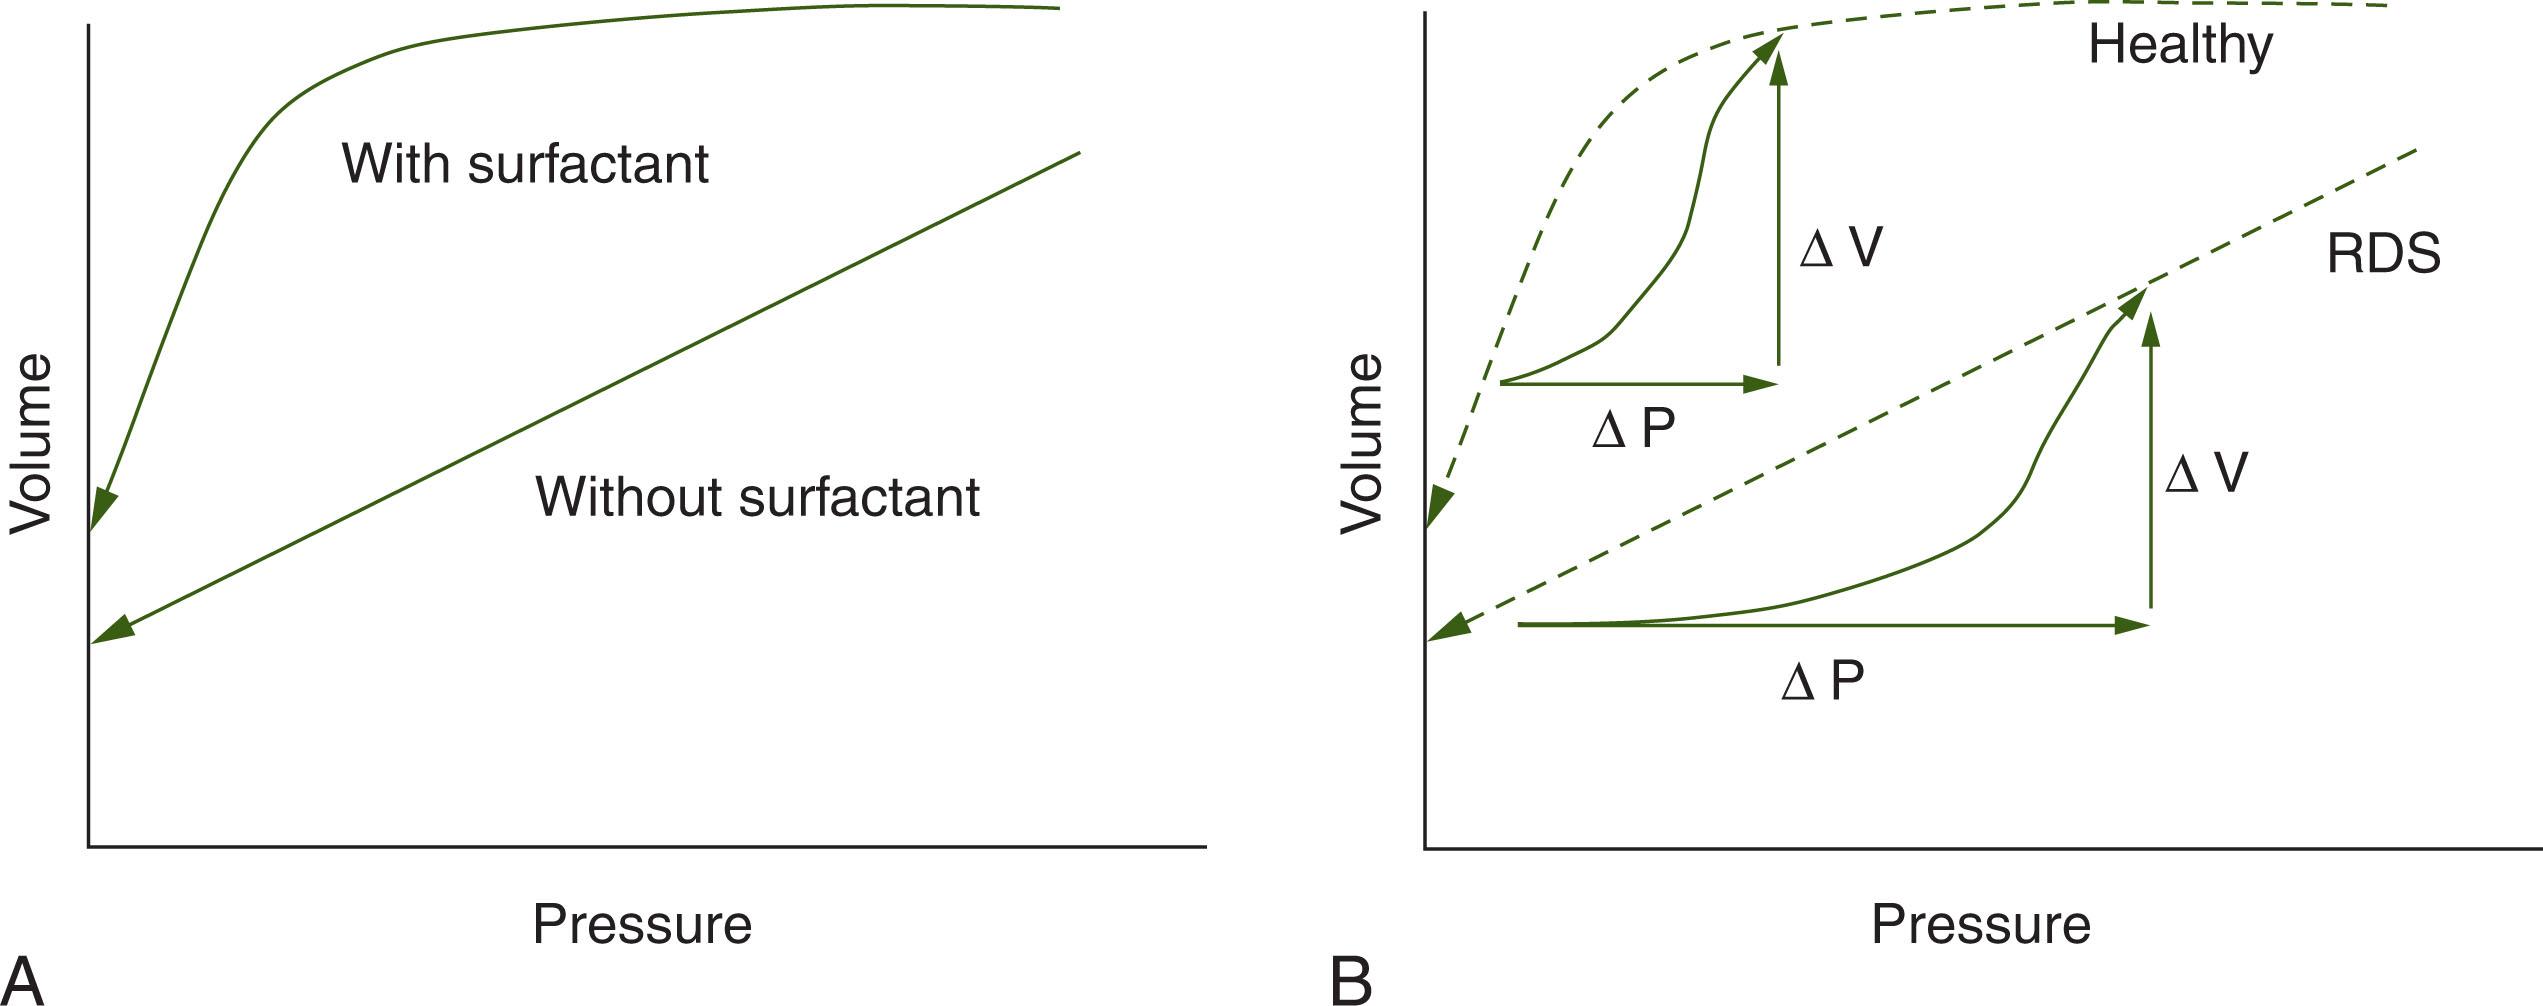 Fig. 42.5, Effect of Surface Forces on Pressure–Volume Relationships. During deflation (A) the lungs with surfactant retain gas even at very low pressures, because of falling surface tension as the alveoli get smaller. The alveoli without surfactant collapse as they get smaller. During inflation of respiratory distress syndrome (RDS) lungs (B), the starting lung volume (functional residual capacity) is lower, and much more pressure is required during inflation, compared with healthy lungs.